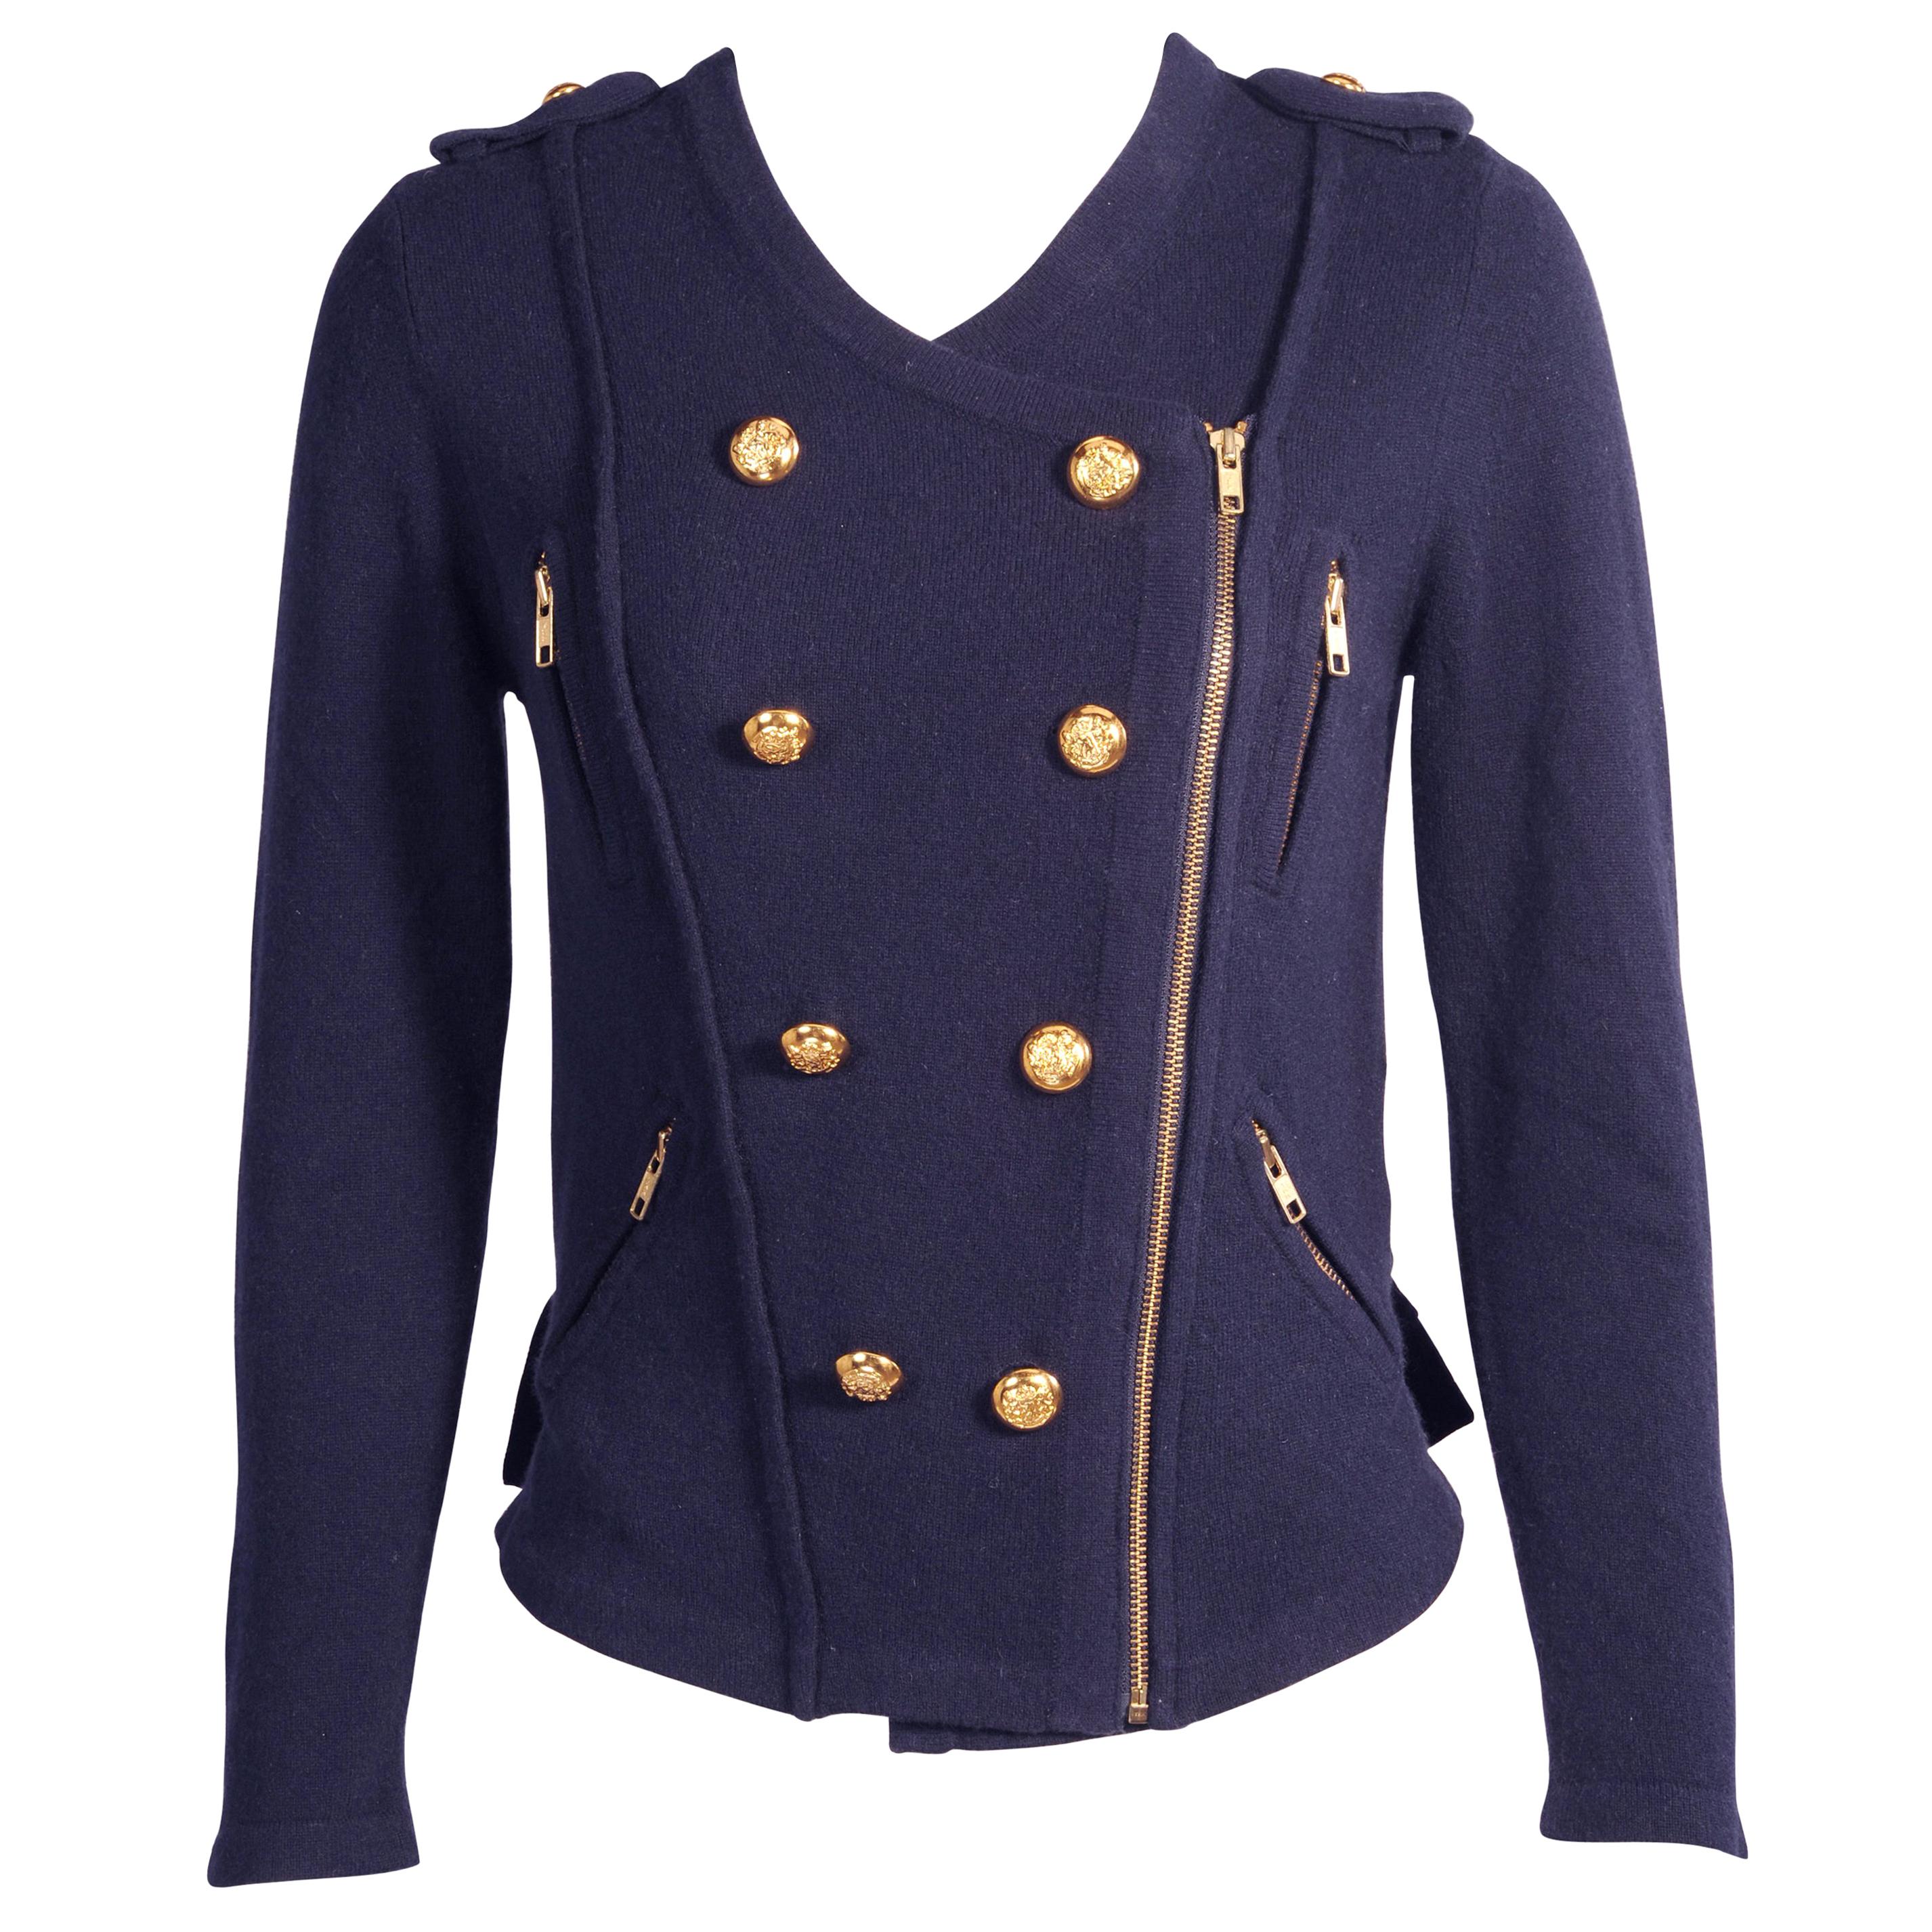 Phillip Lim Military Inspired Navy Blue Cashmere Cardigan